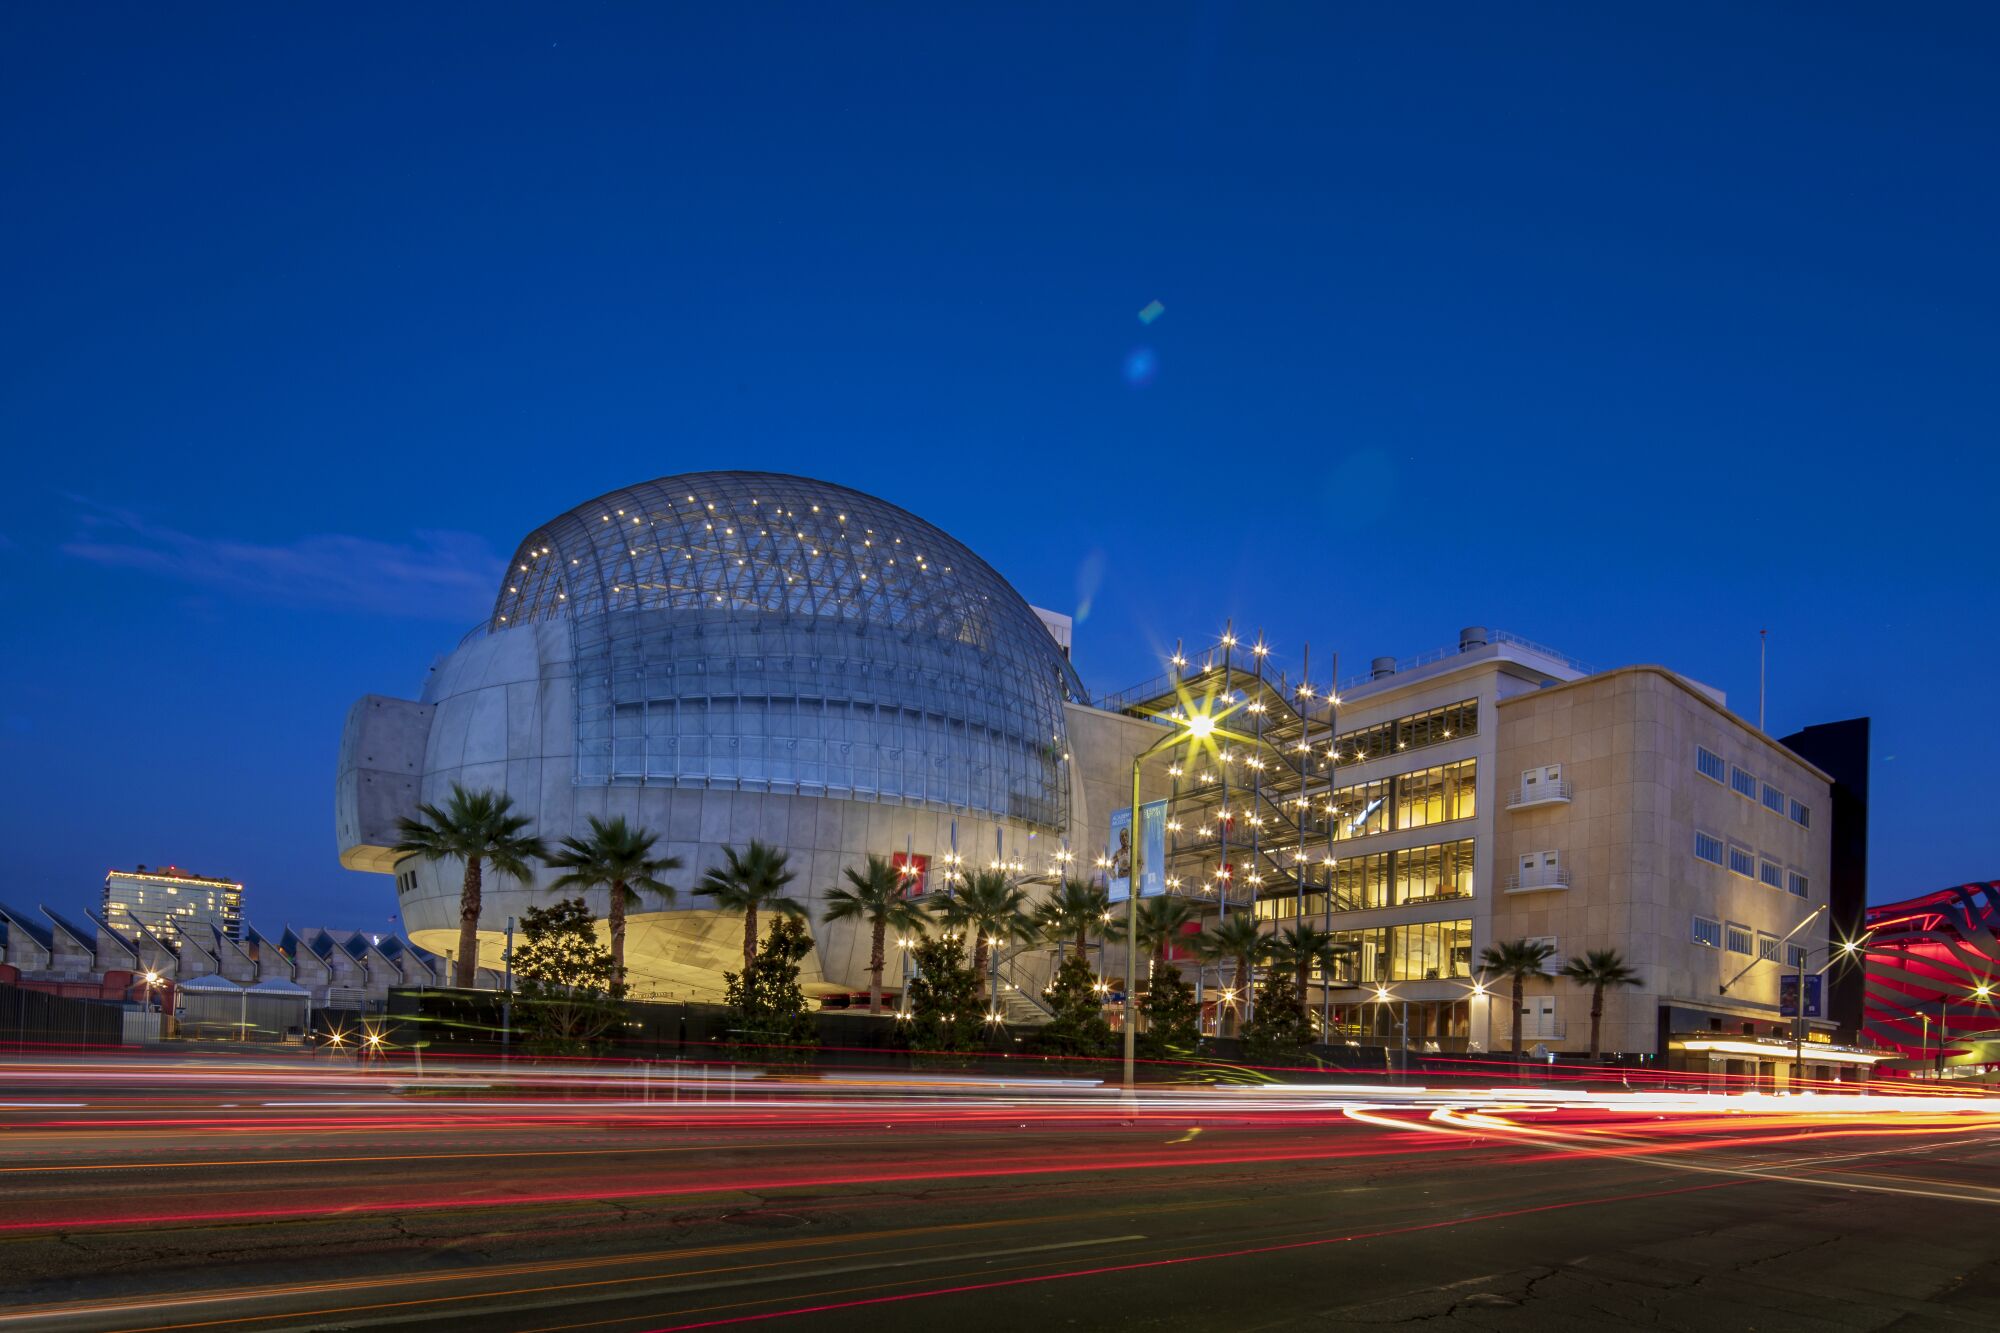 The new Academy Museum of Motion Pictures in Los Angeles.